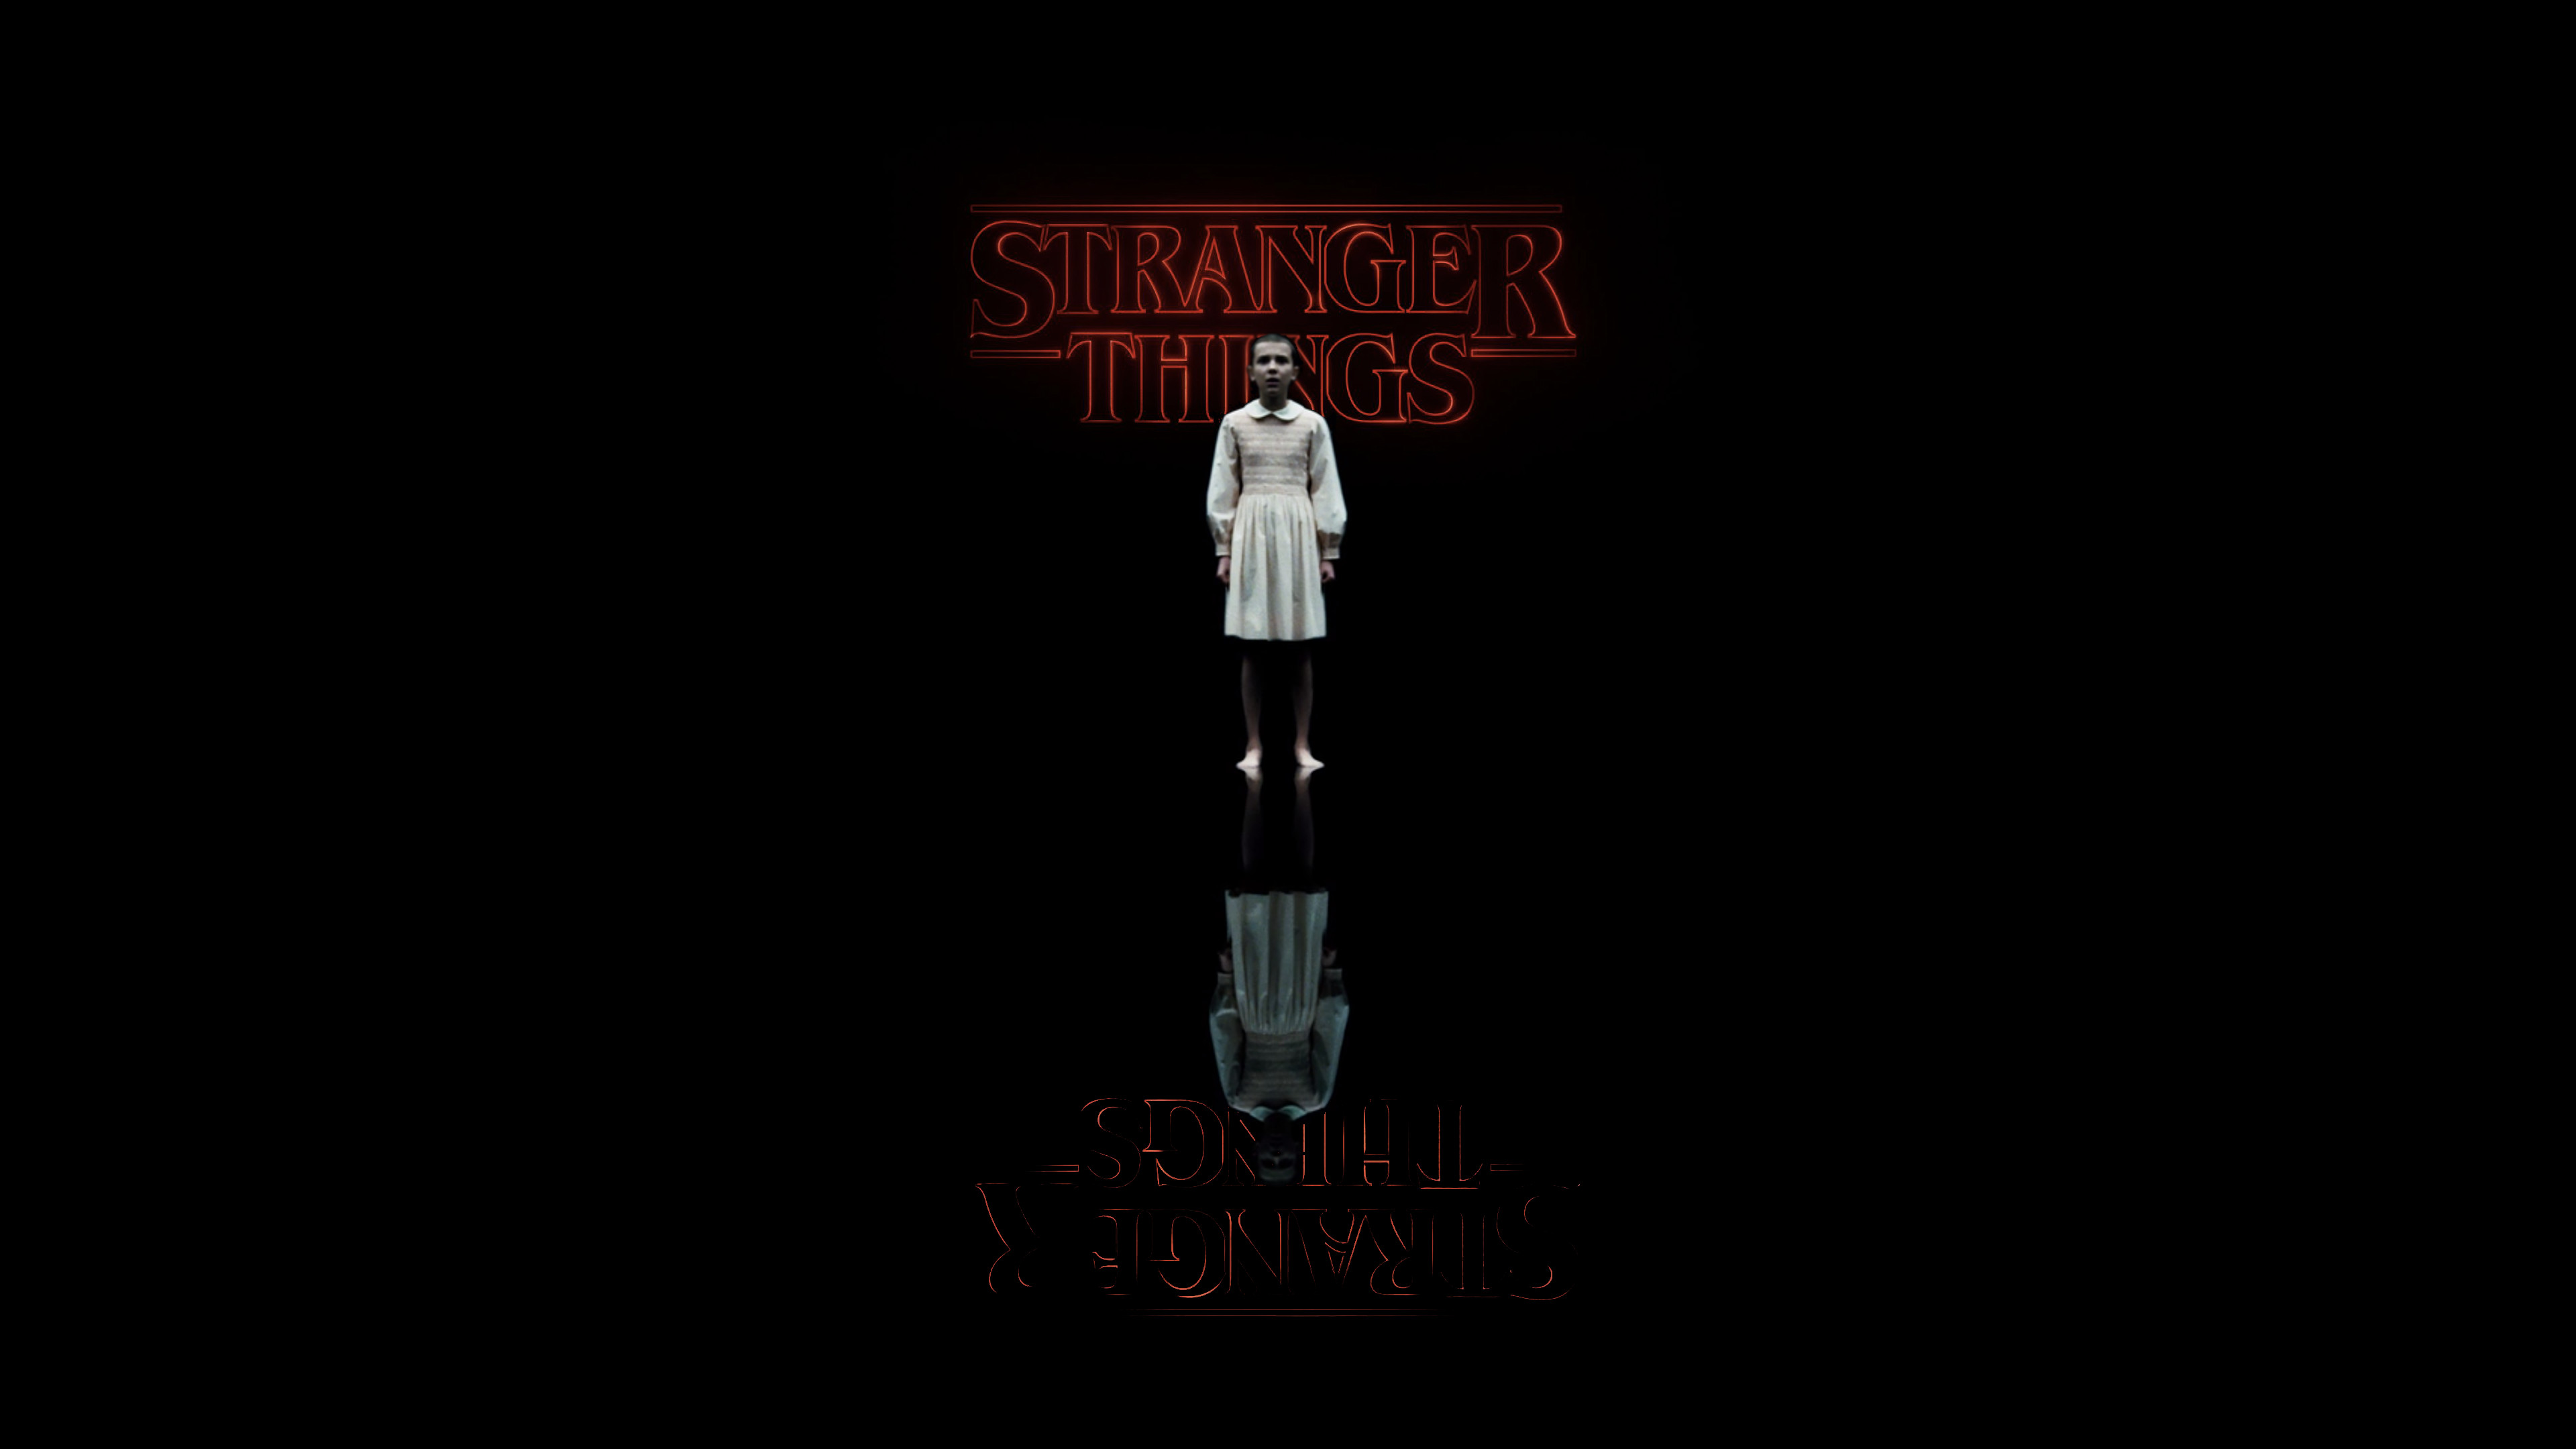 3840x2160 AwesomeI just made a simple UHD(4k) Stranger Things wallpaper![